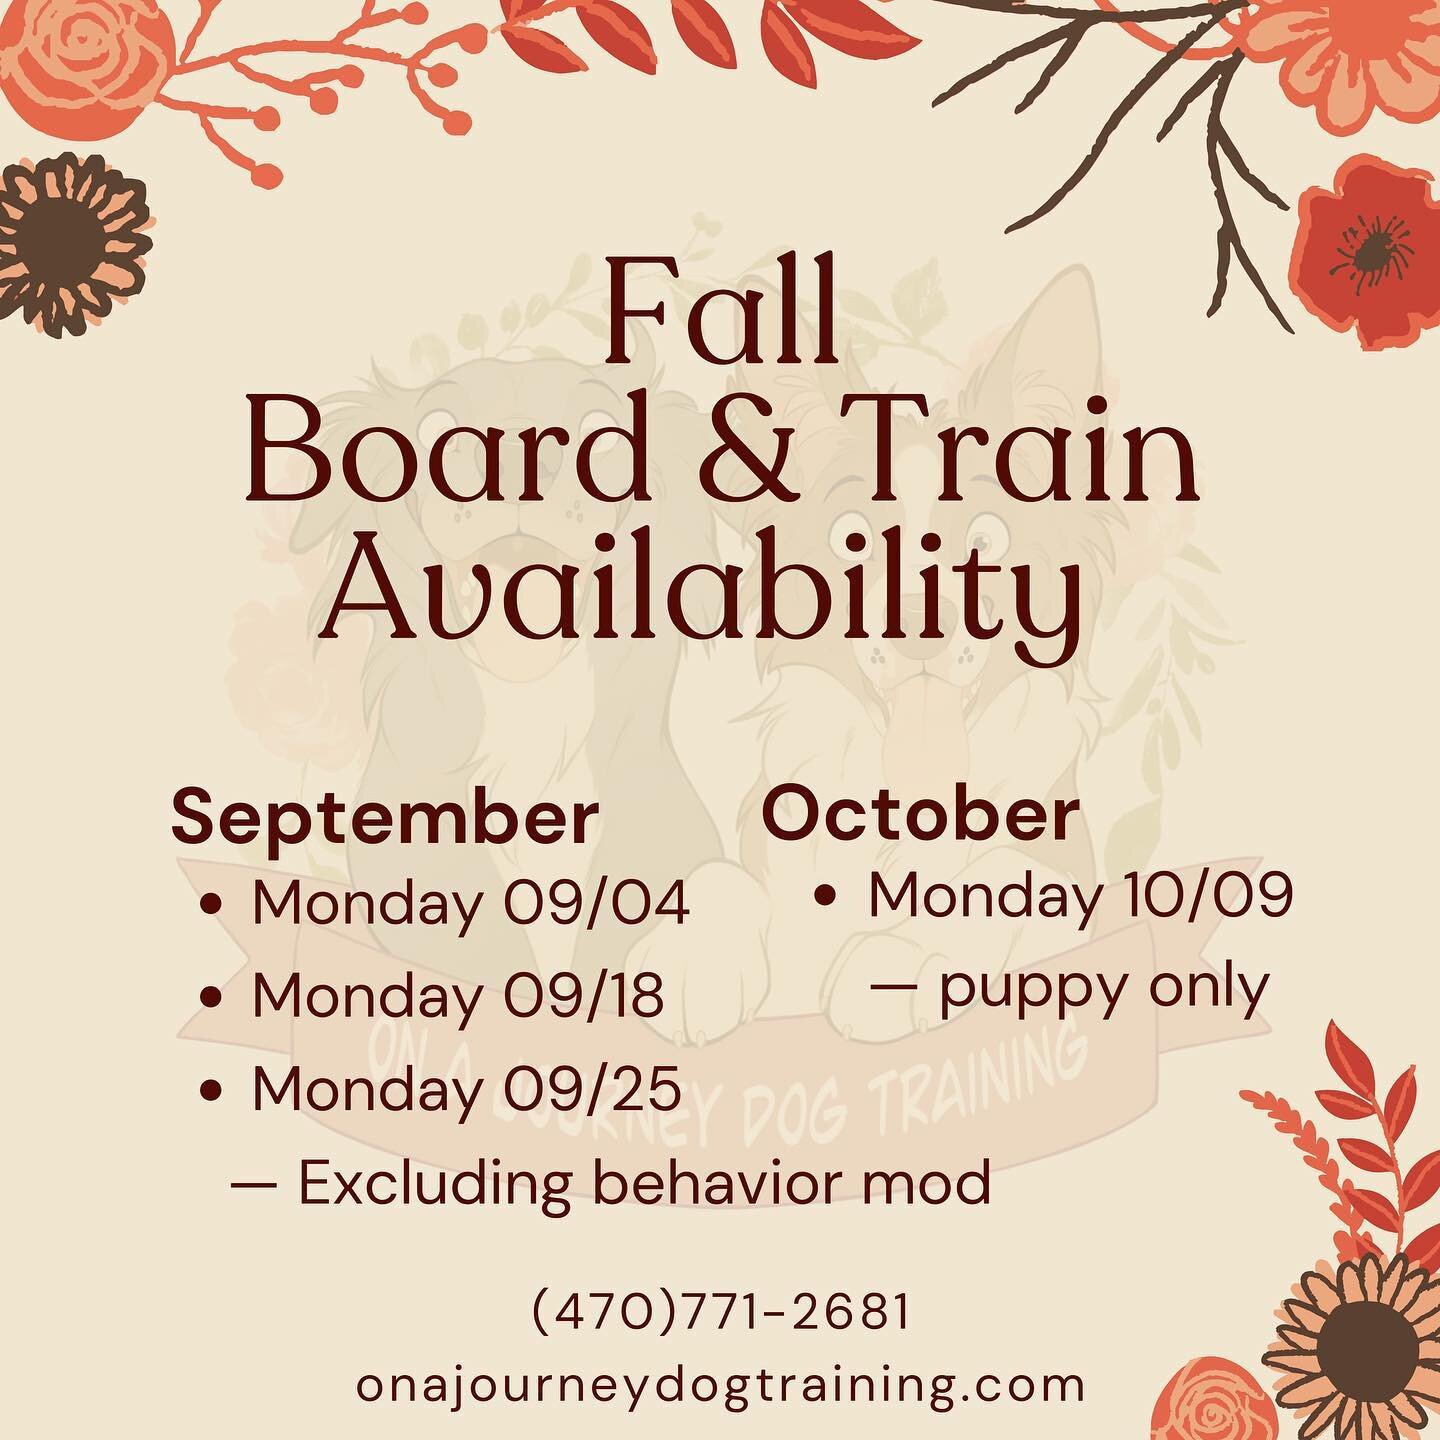 Autumn leaves and cooler weather are approaching! 🍂 There couldn&rsquo;t be a more ideal time to book your dog for training!

Mention this flyer and get 10% off when booking for one of these dates!

🍁🍁🍁
&bull;
#OnAJourney #dogtrainersofatlanta #a